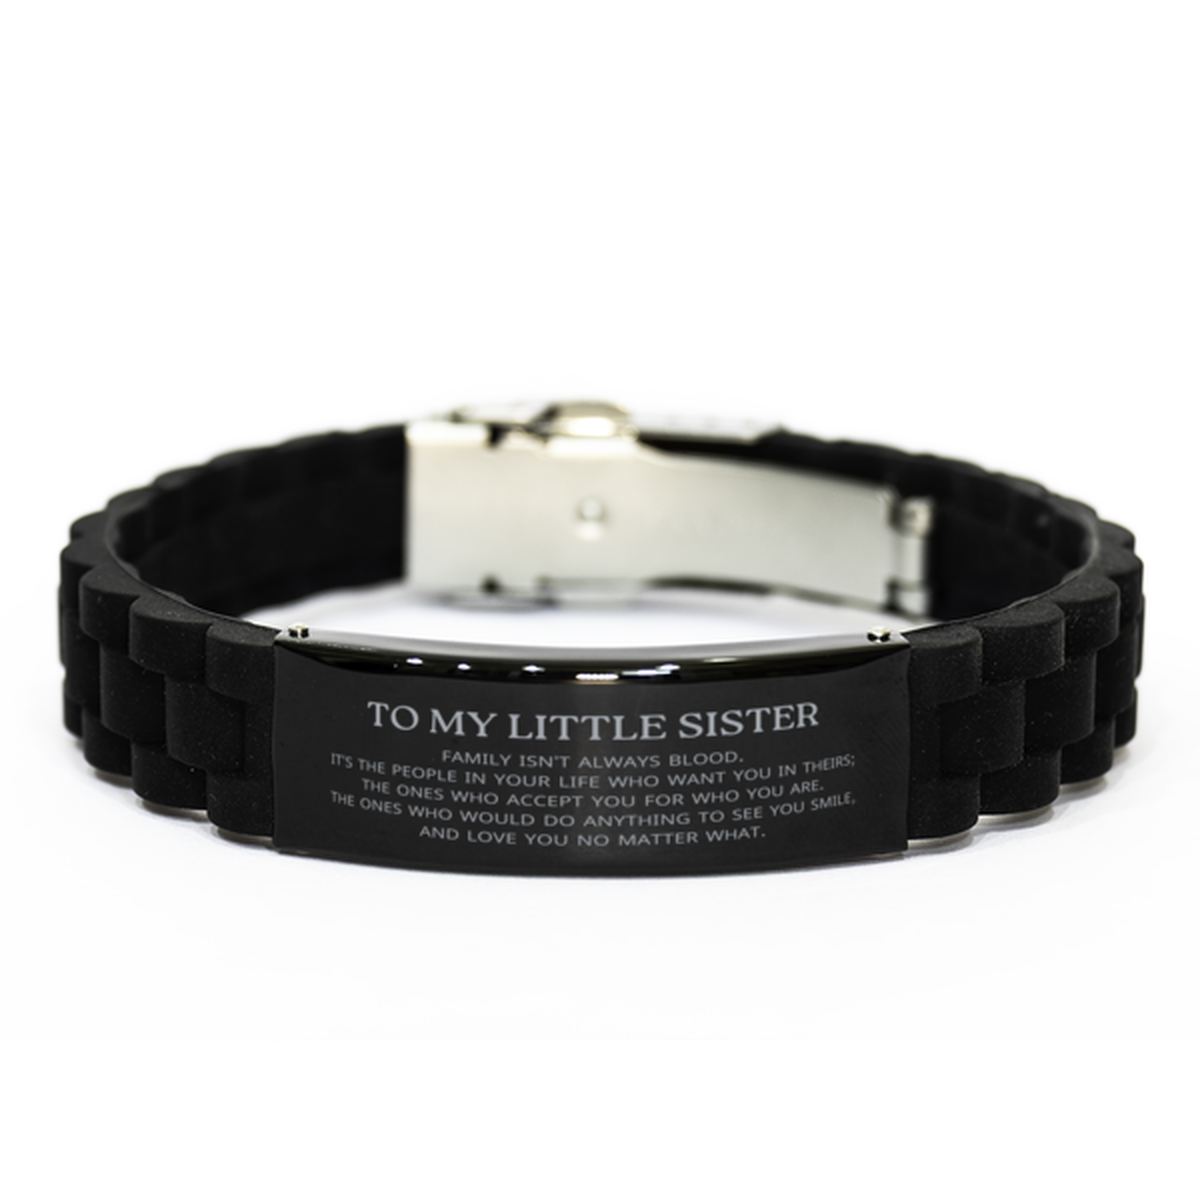 To My Little Sister Gifts, Family isn't always blood, Little Sister Black Glidelock Clasp Bracelet, Birthday Christmas Unique Present For Little Sister